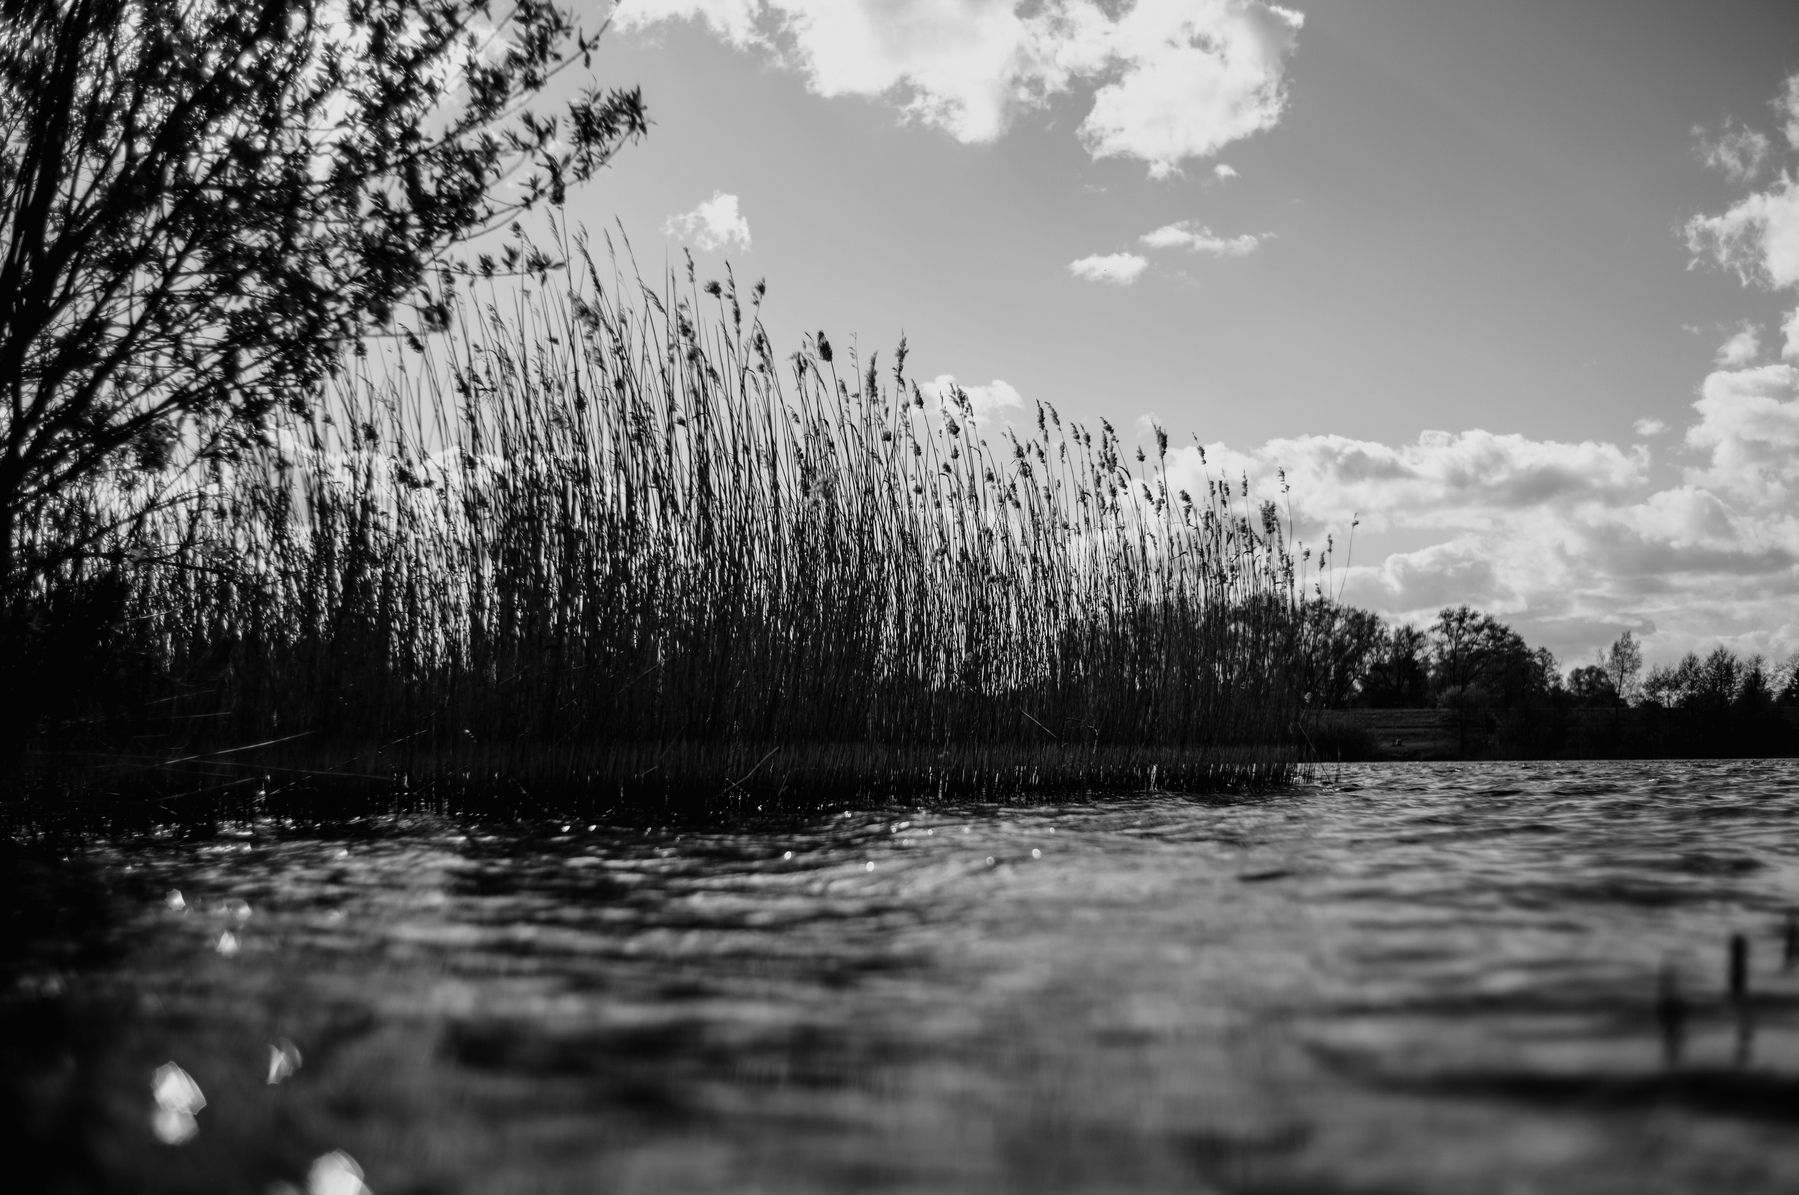 A black and white photograph showing tall reeds silhouetted against a sky with clouds, viewed from a low angle near the water's surface.